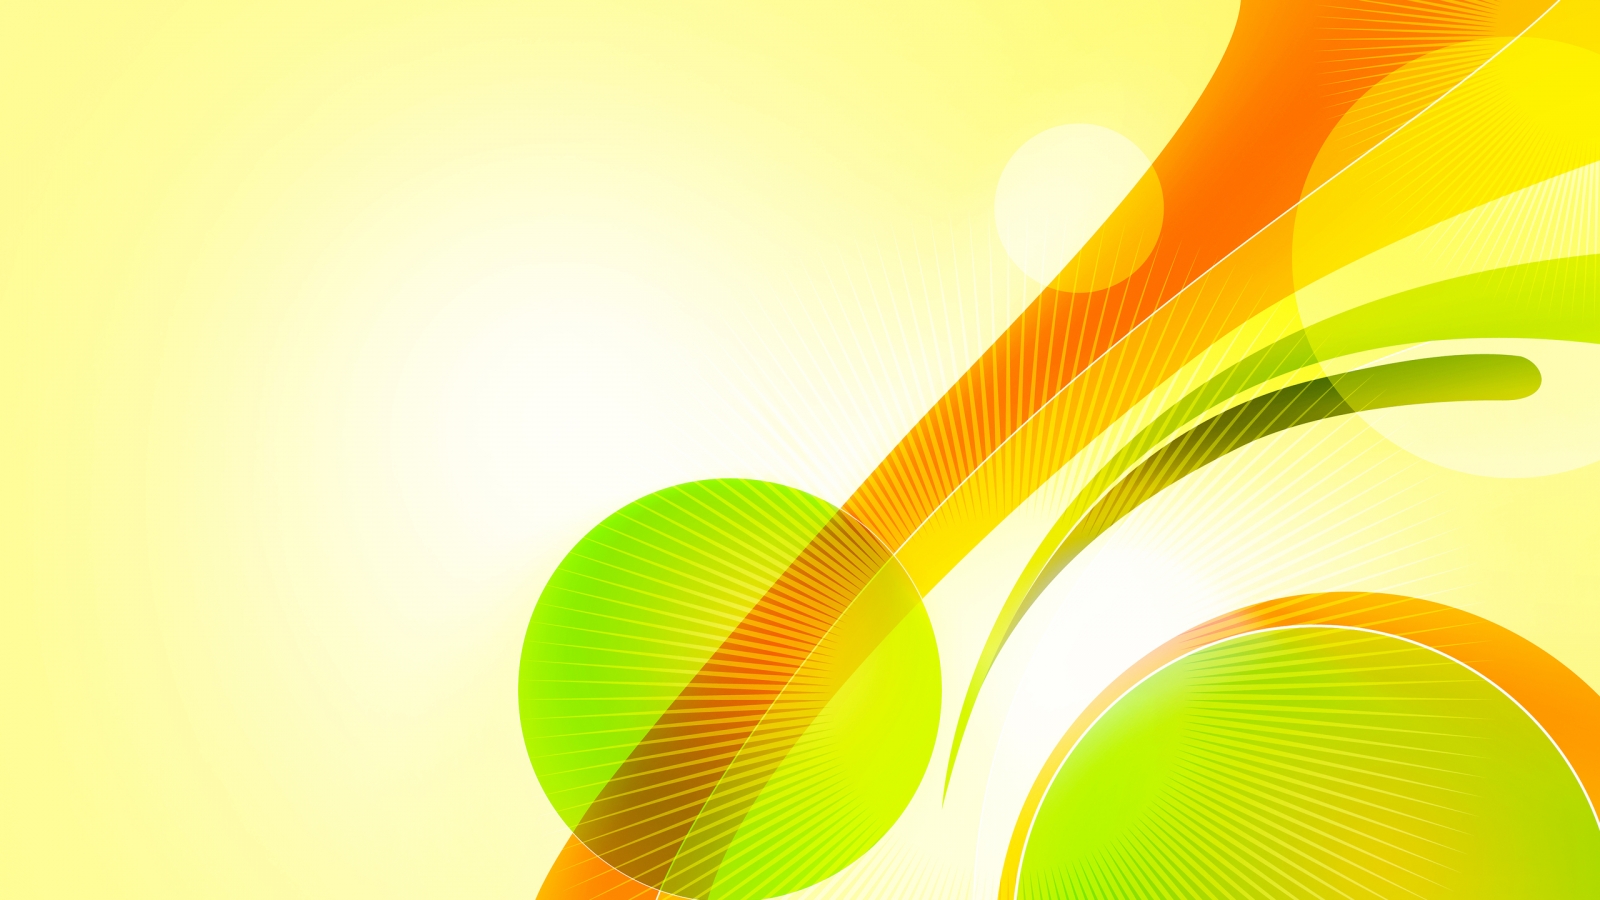 Great Colourful Abstract for 1600 x 900 HDTV resolution